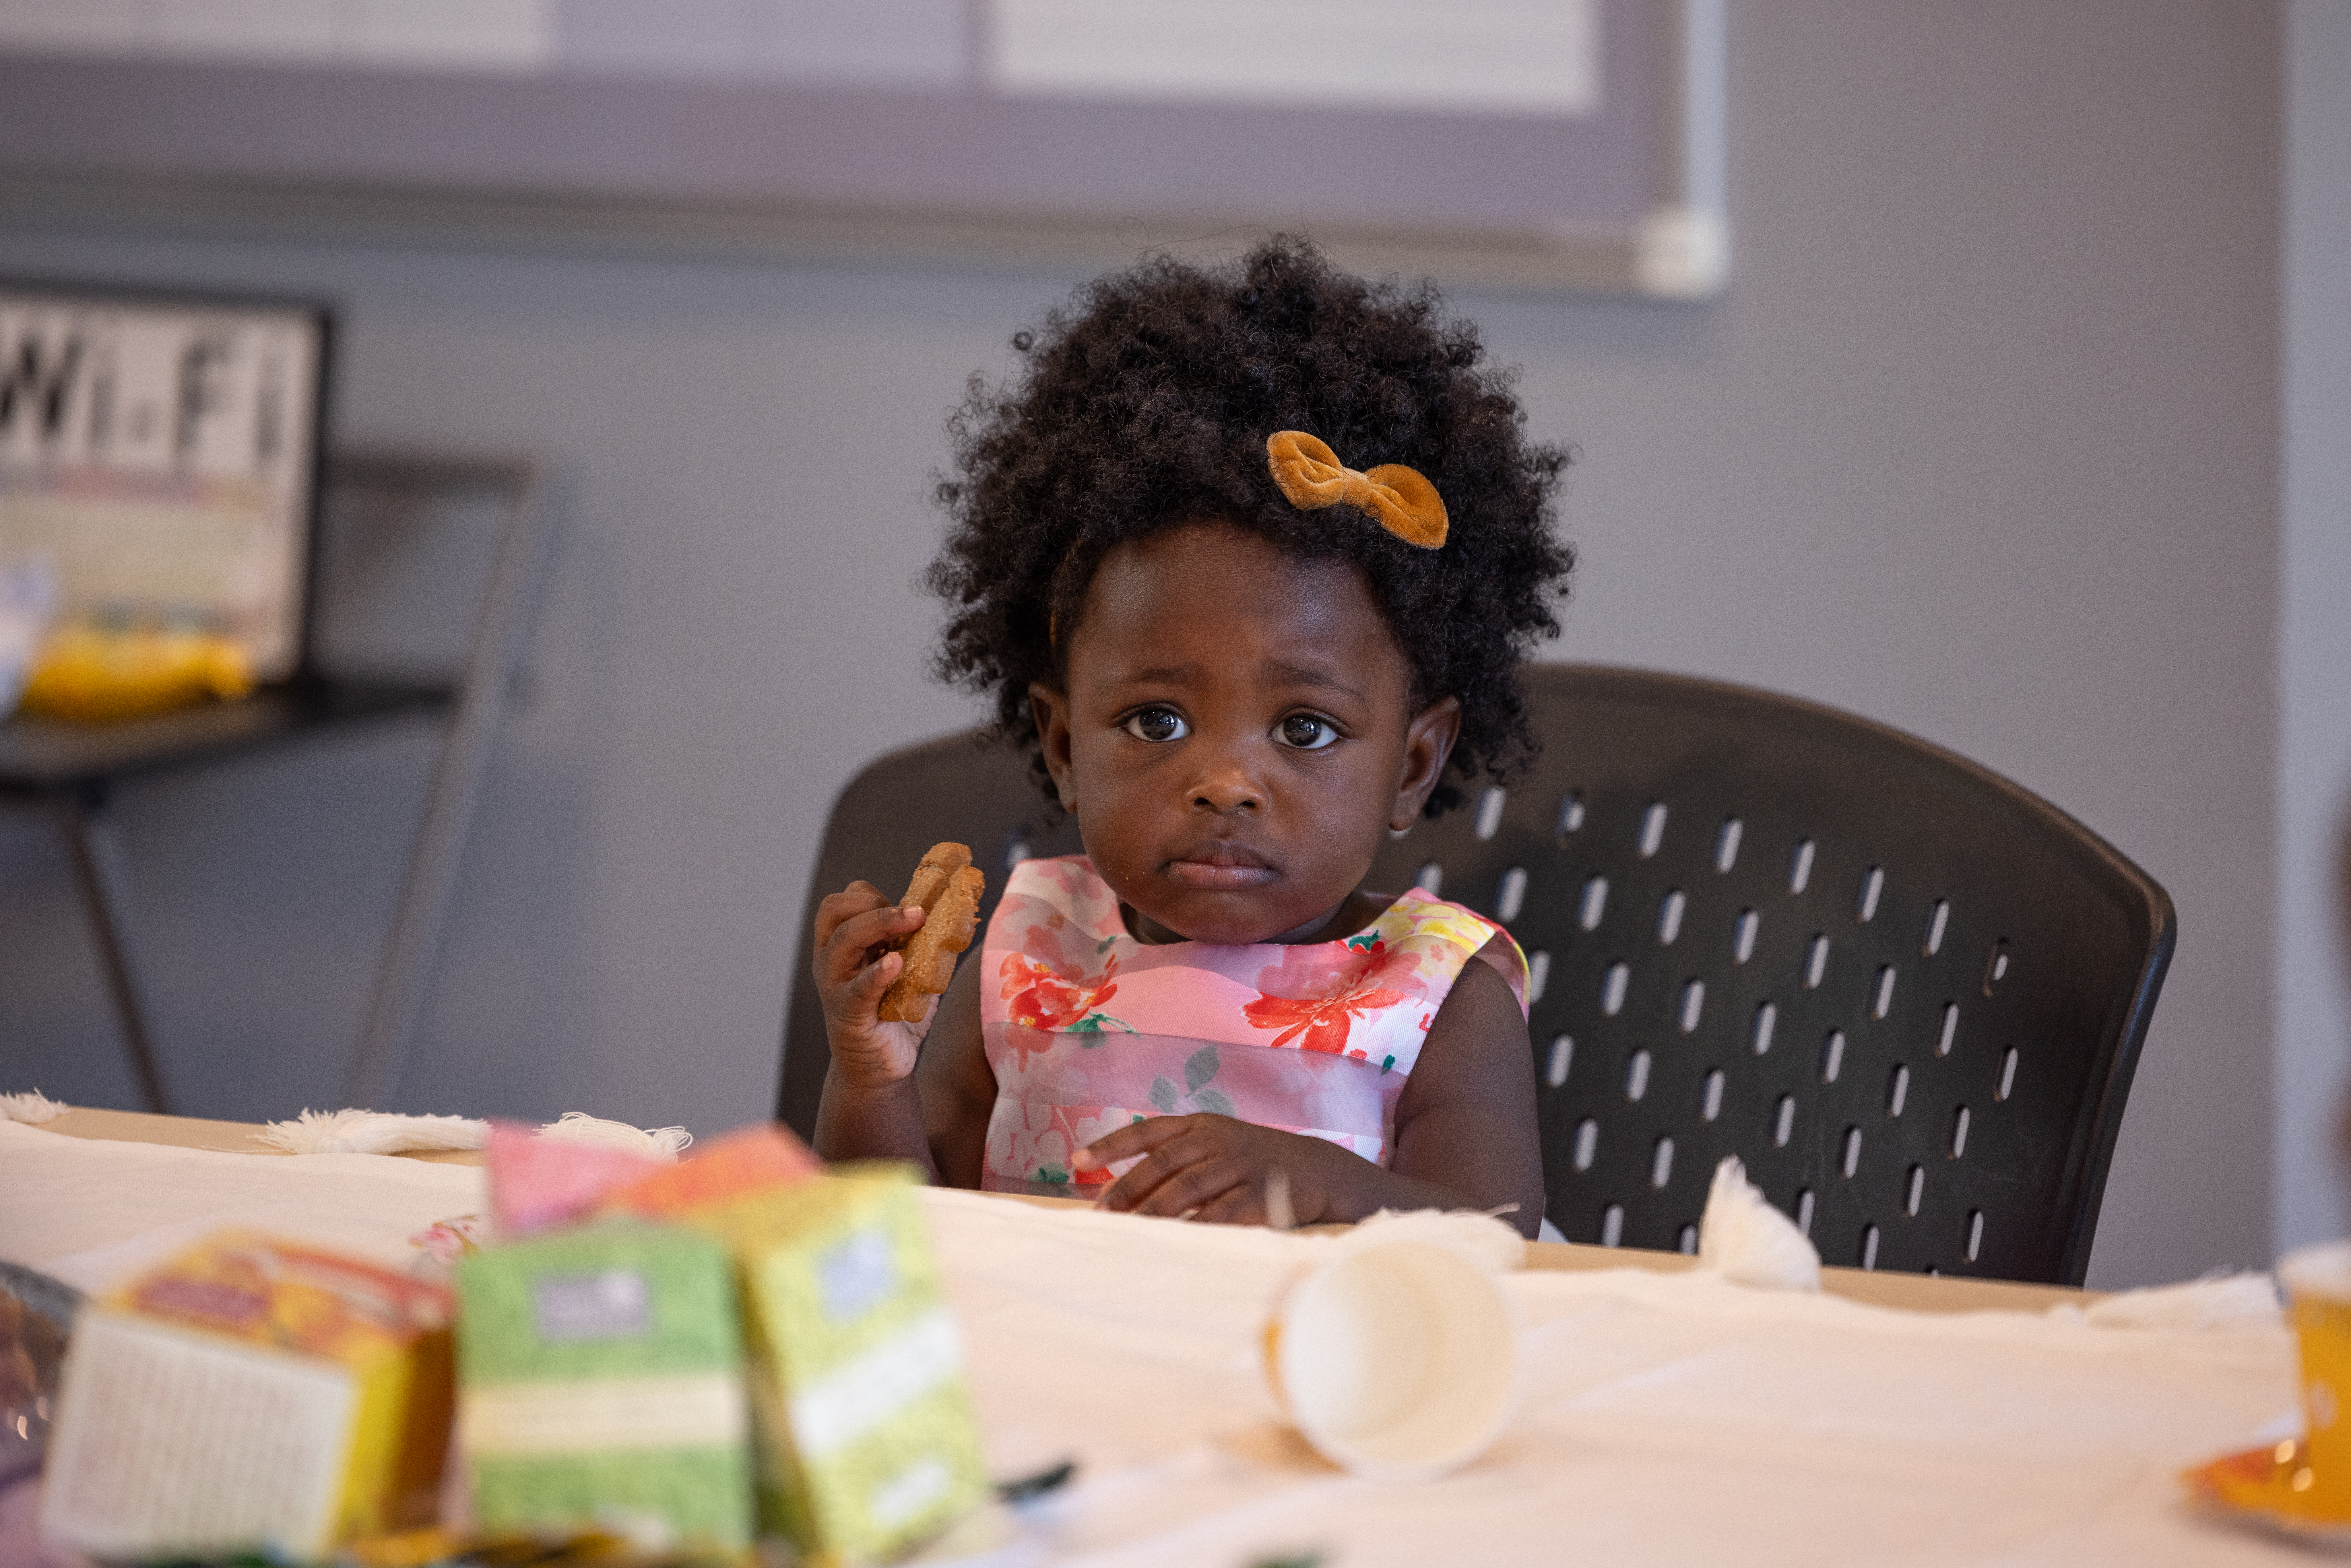 Proposed Legislation Aims to Help Child Care Providers Serve Nutritious Meals